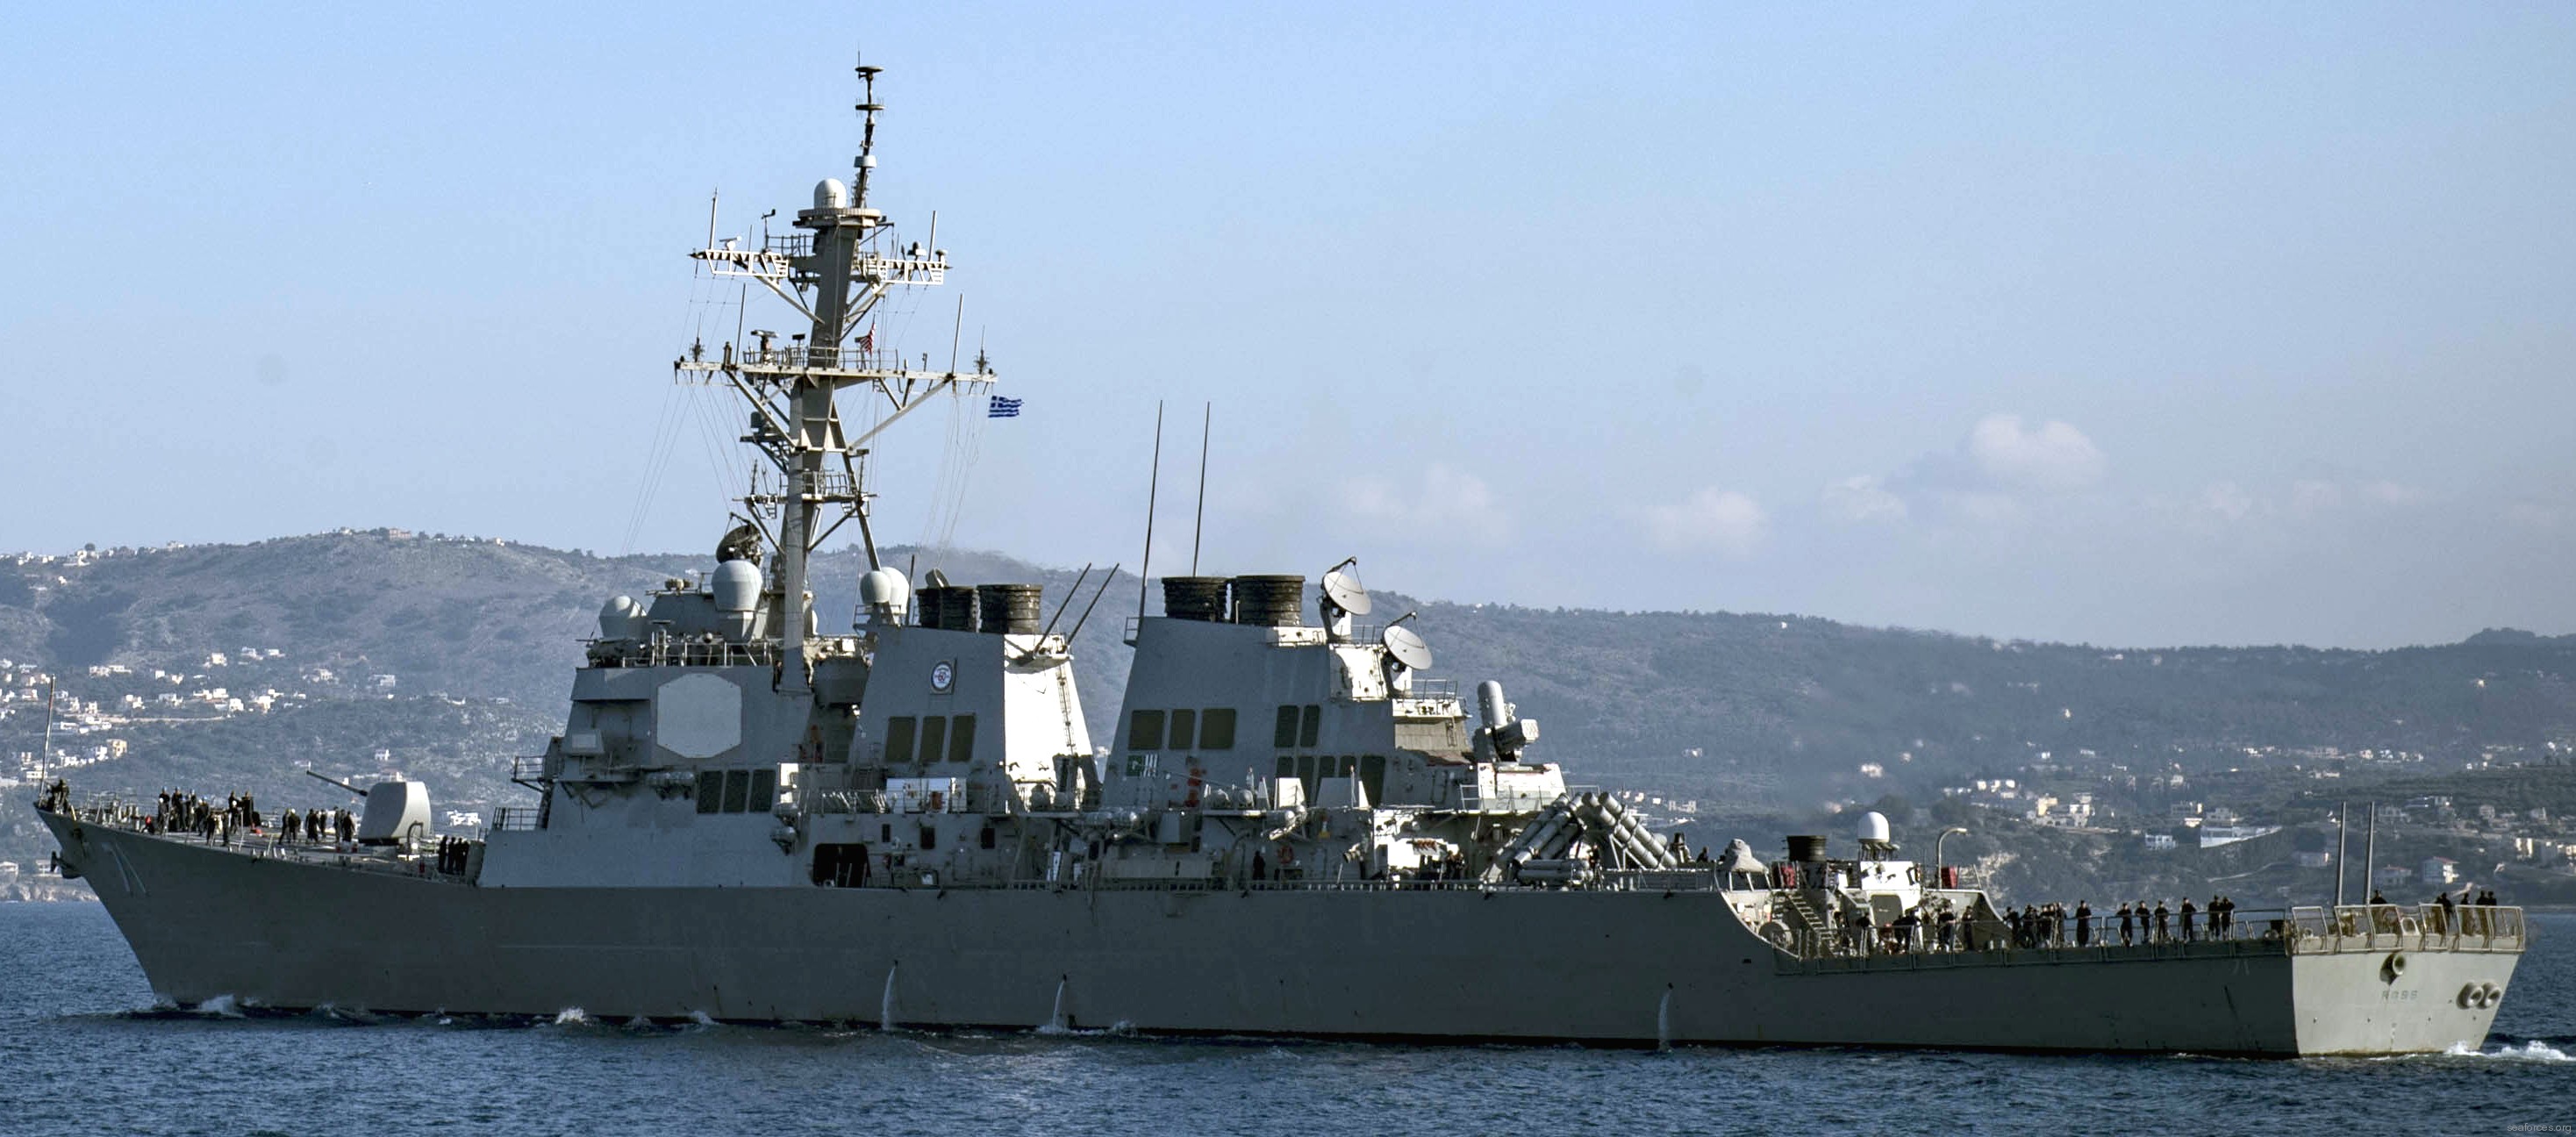 ddg-71 uss ross guided missile destroyer arleigh burke class aegis bmd 17